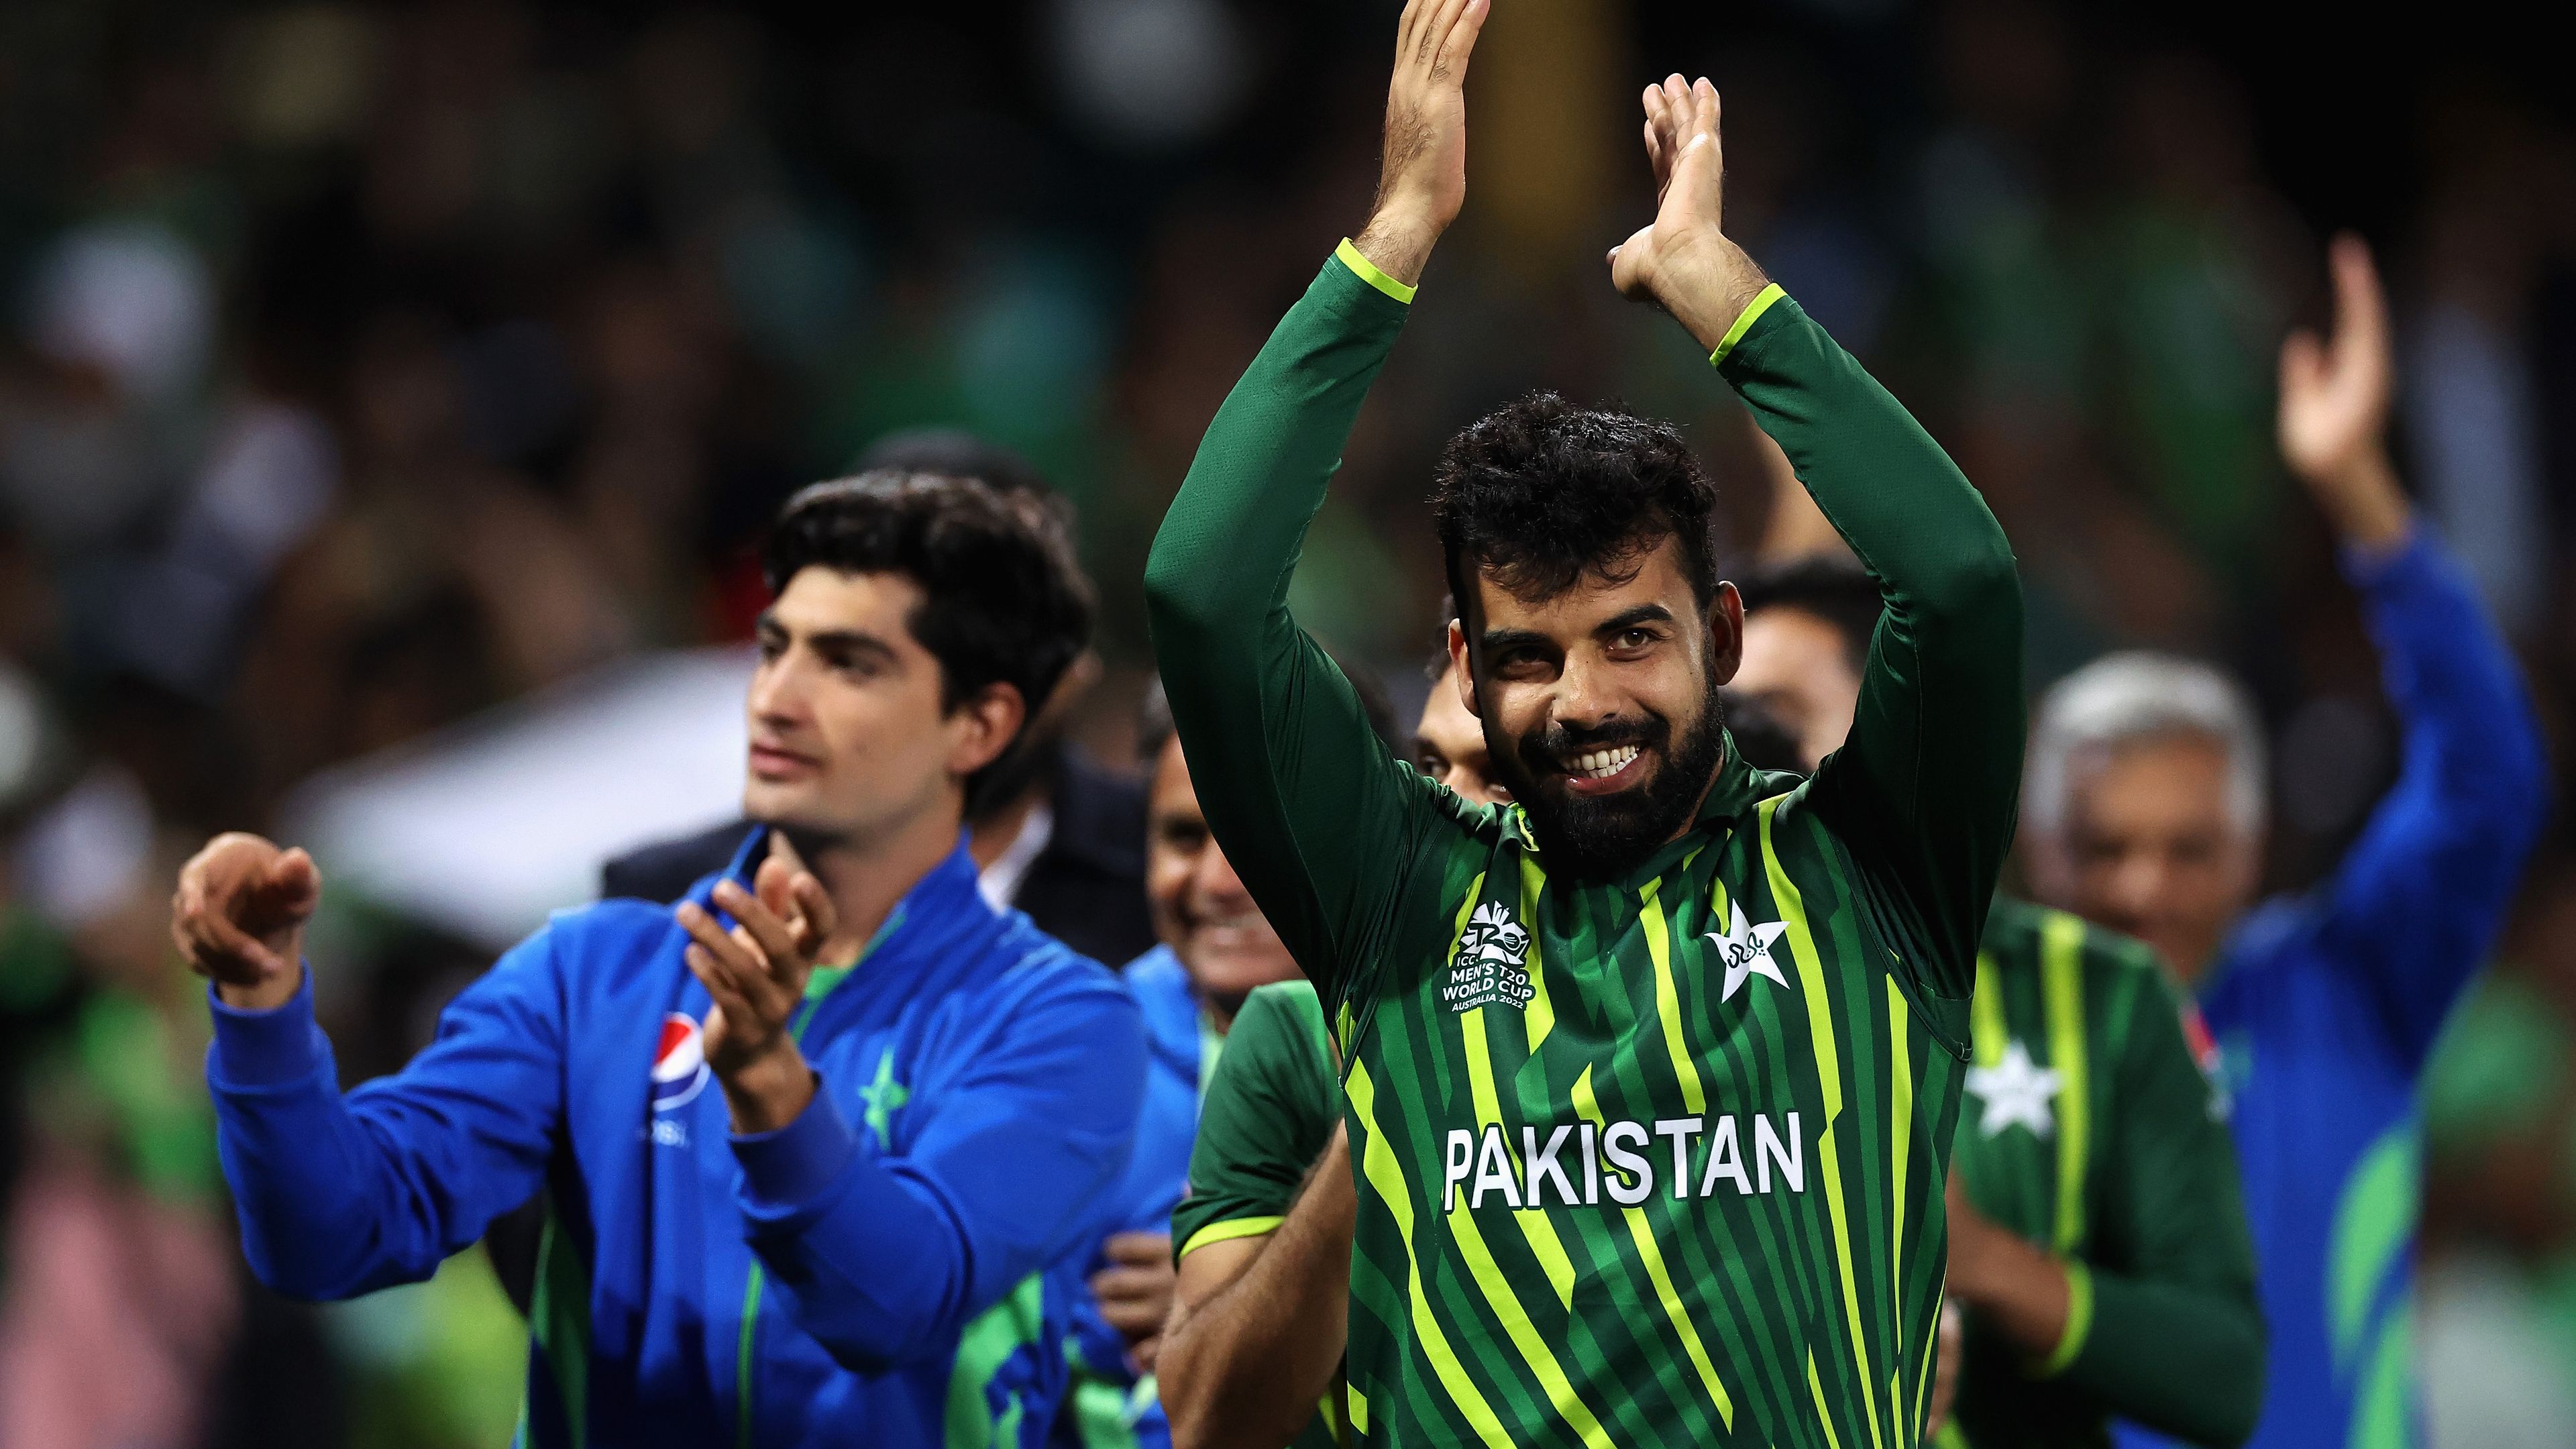 Record-setting opening pair leads Pakistan to T20 World Cup final in stunning turn of fortunes